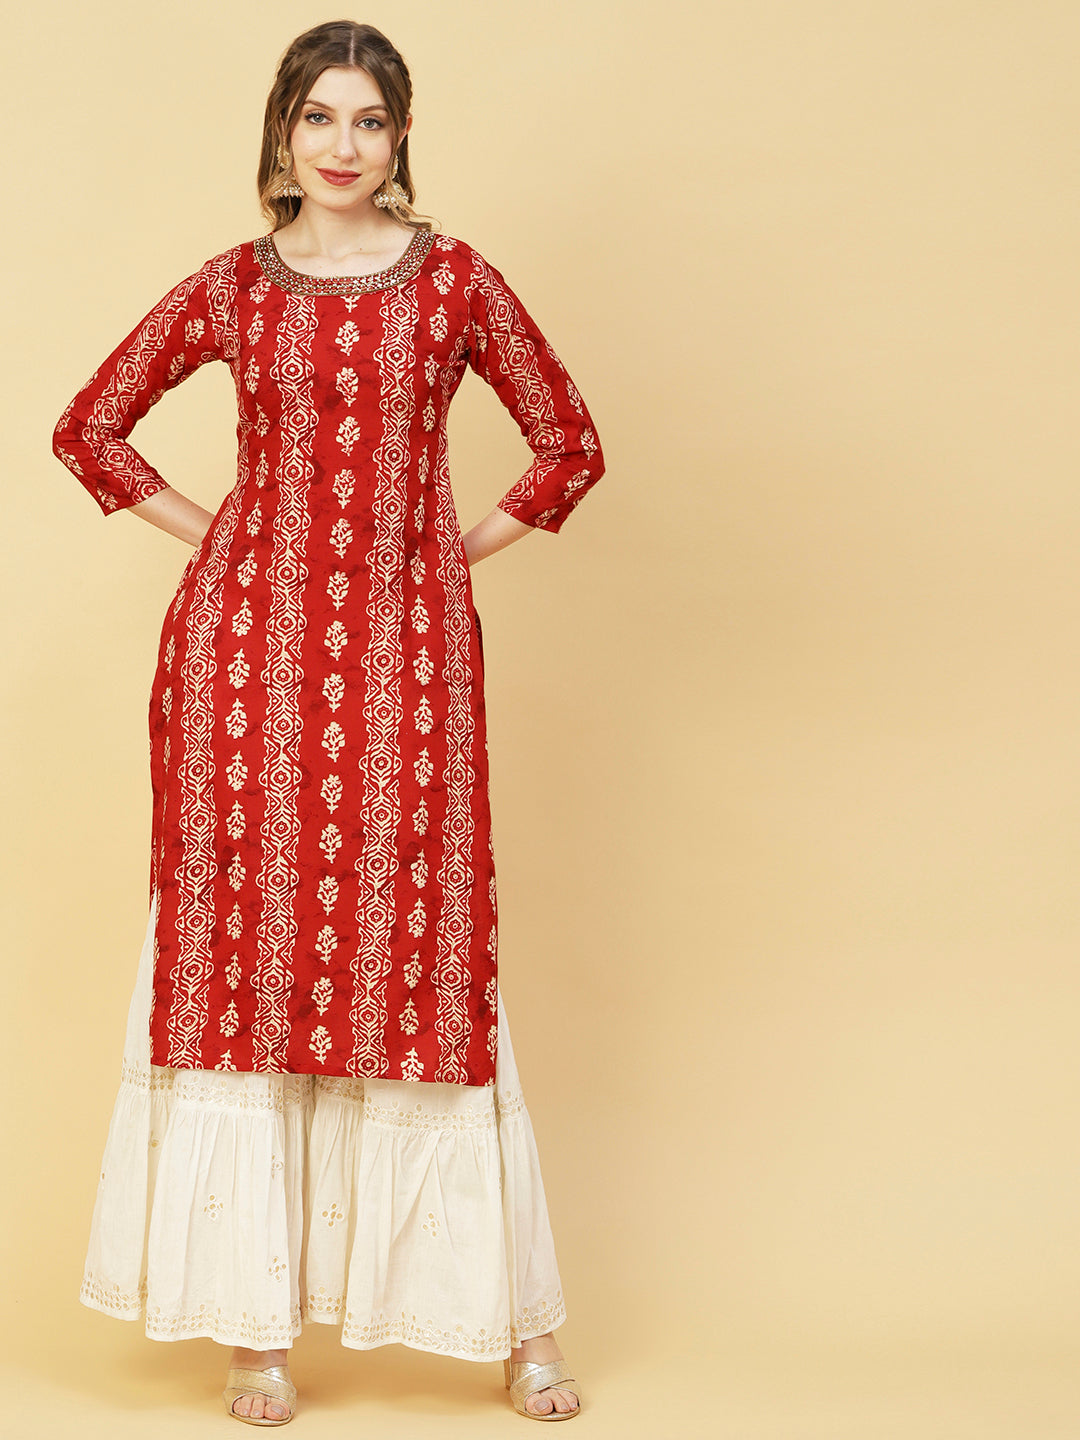 Abstract Foil Printed Mirror, Cutdana & Pearl Embroidered Kurta - Red